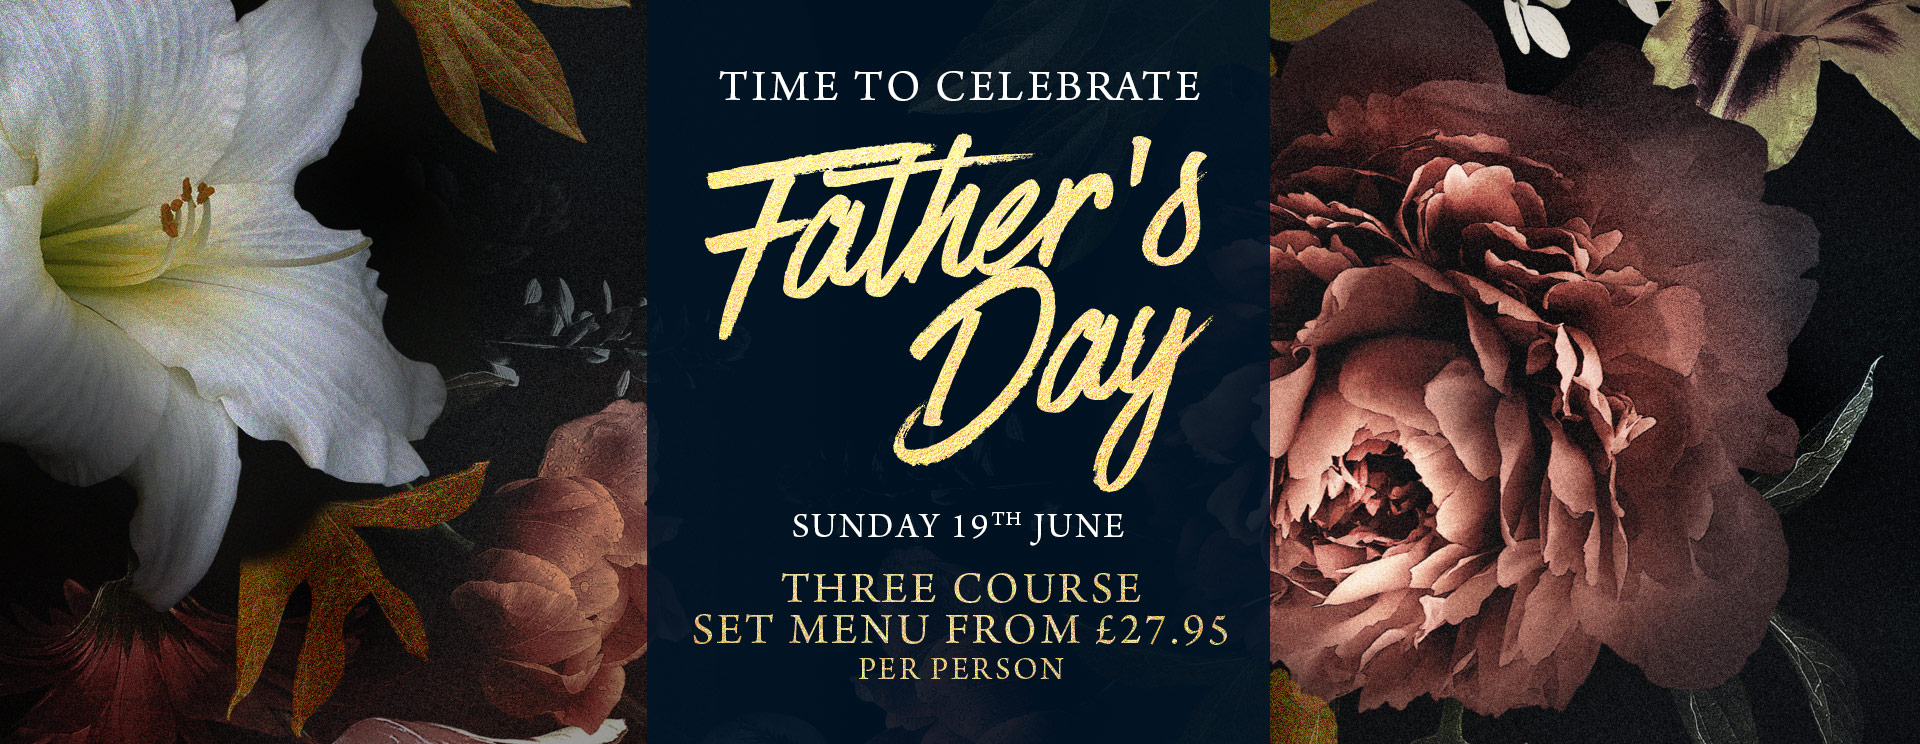 Fathers Day at The Saxon Mill